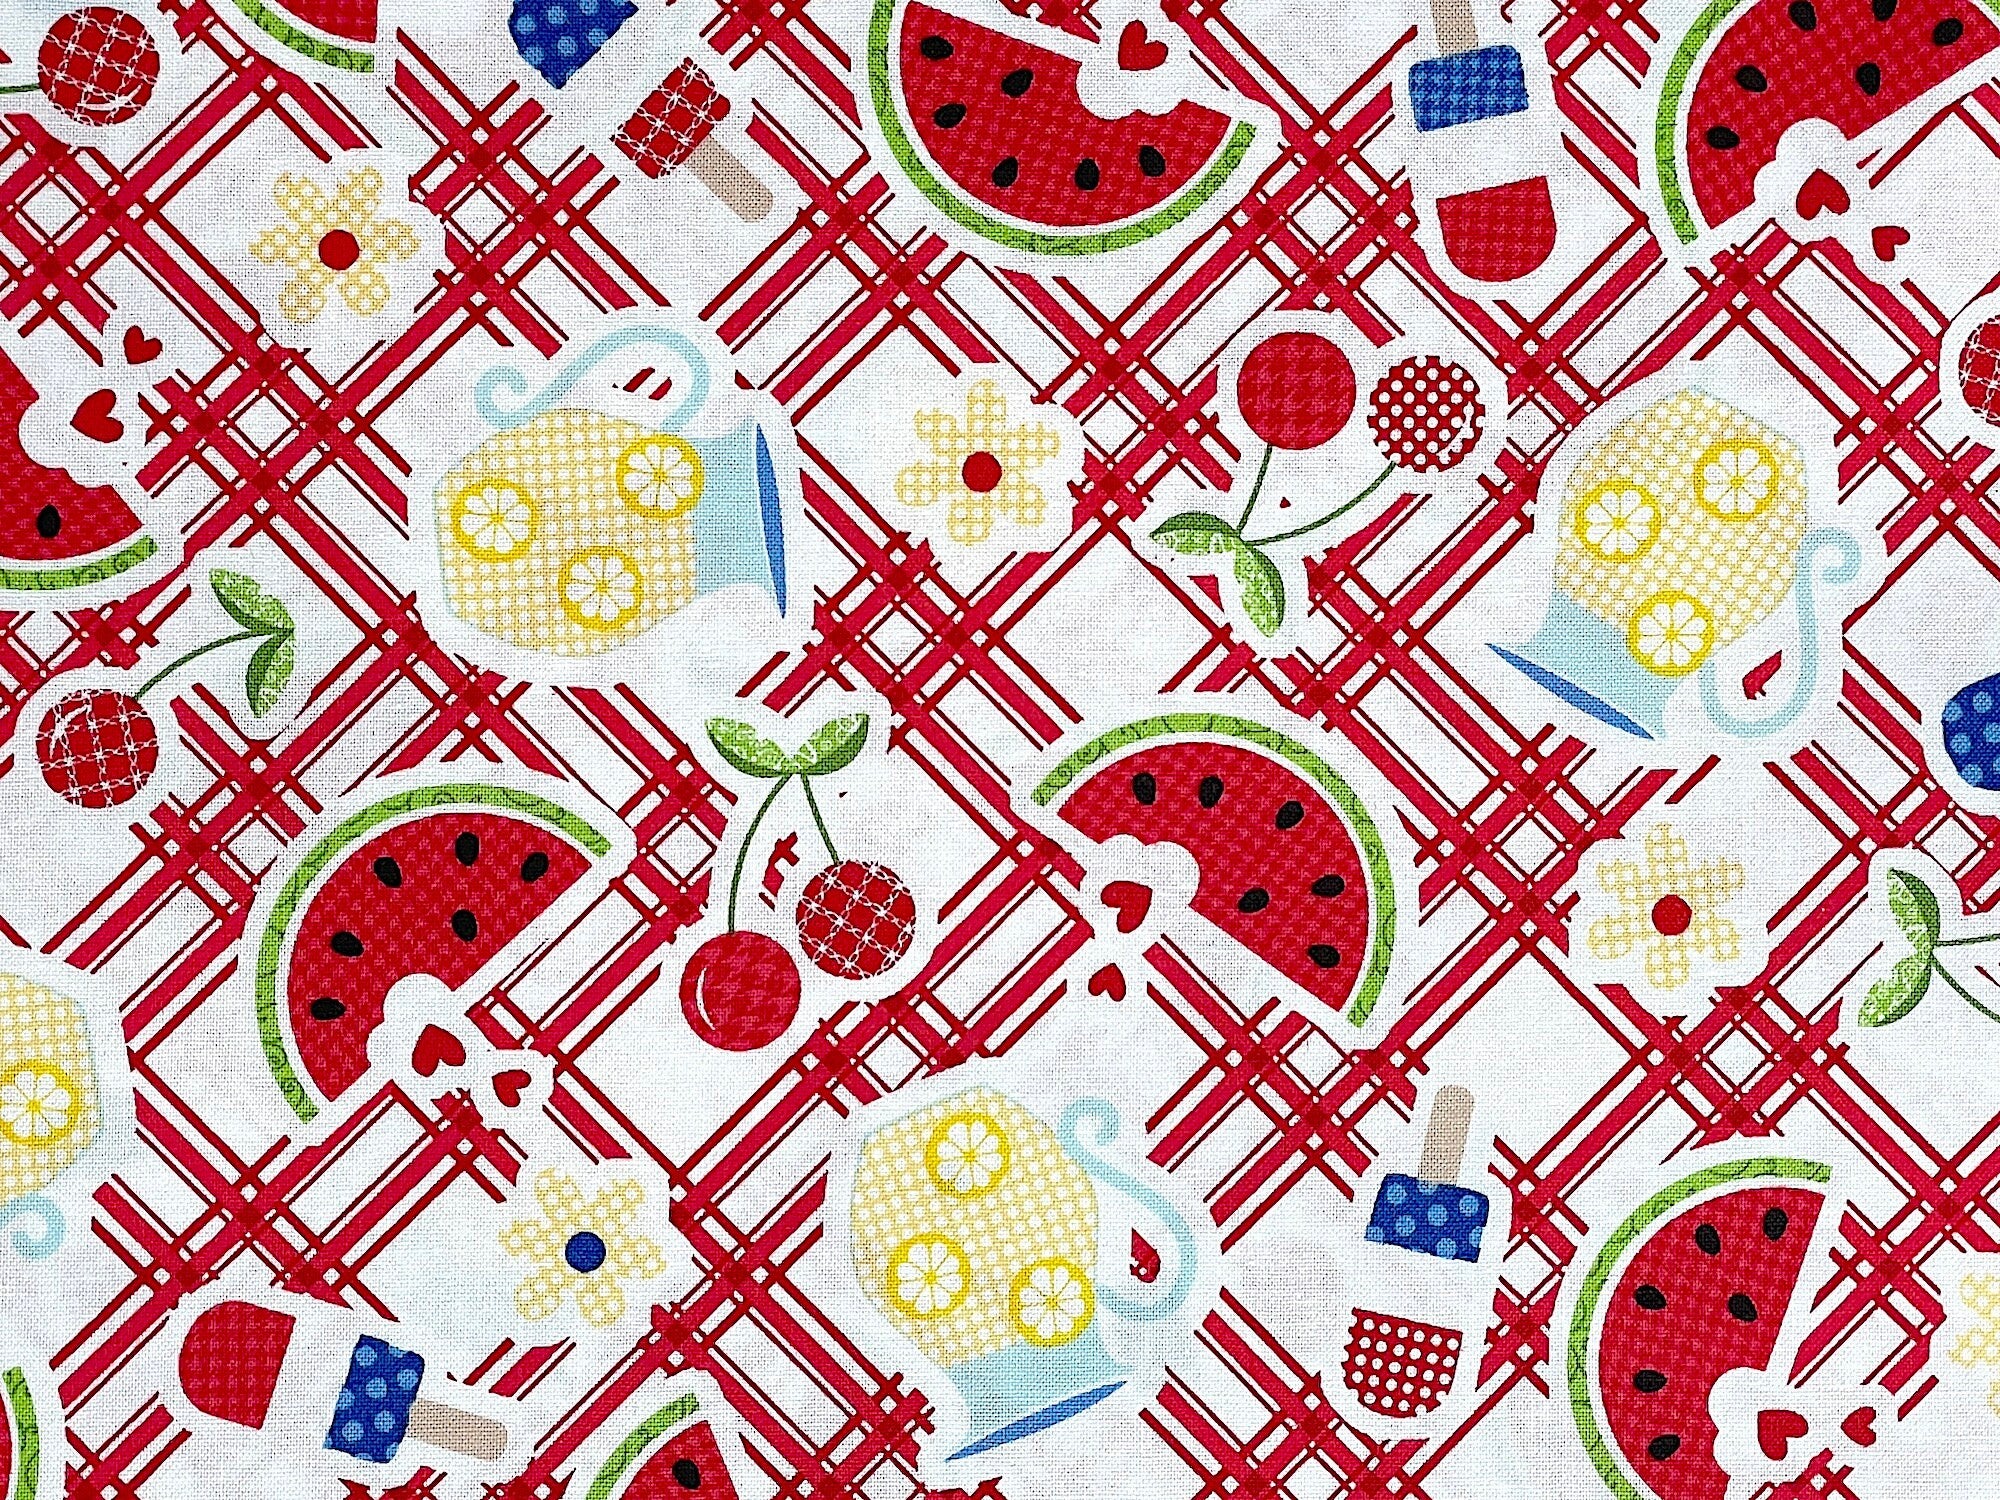 This fabric looks like a Red and White Plaid Tablecloth with pieces of Watermelon, picture's of lemonade and red white and blue ice cream bars